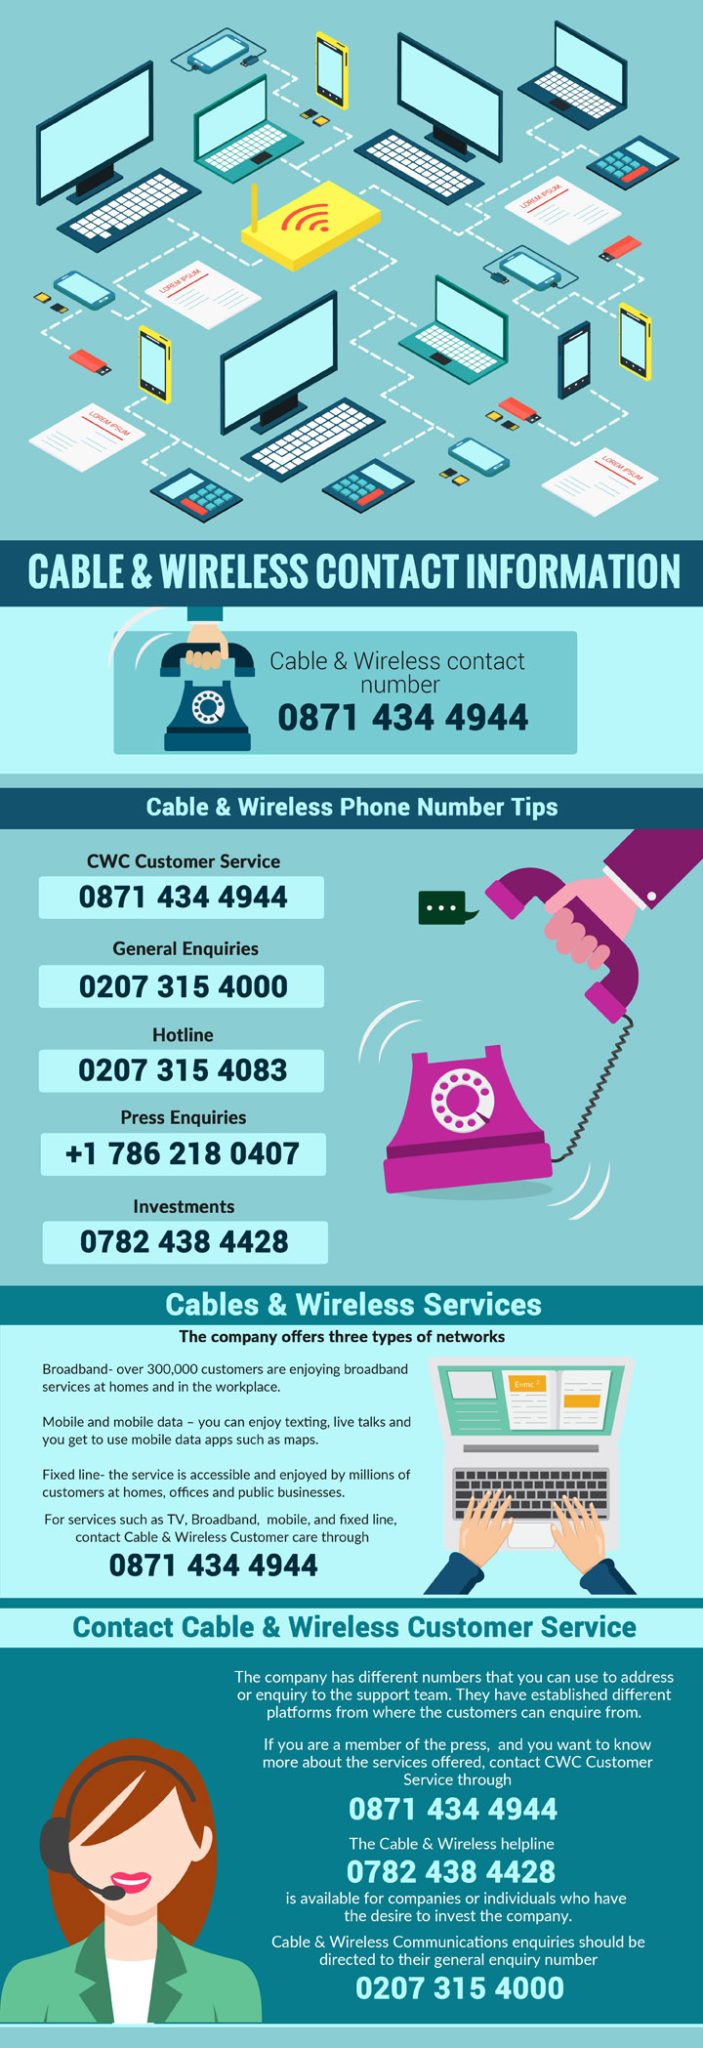 Cable & Wireless Contact Number